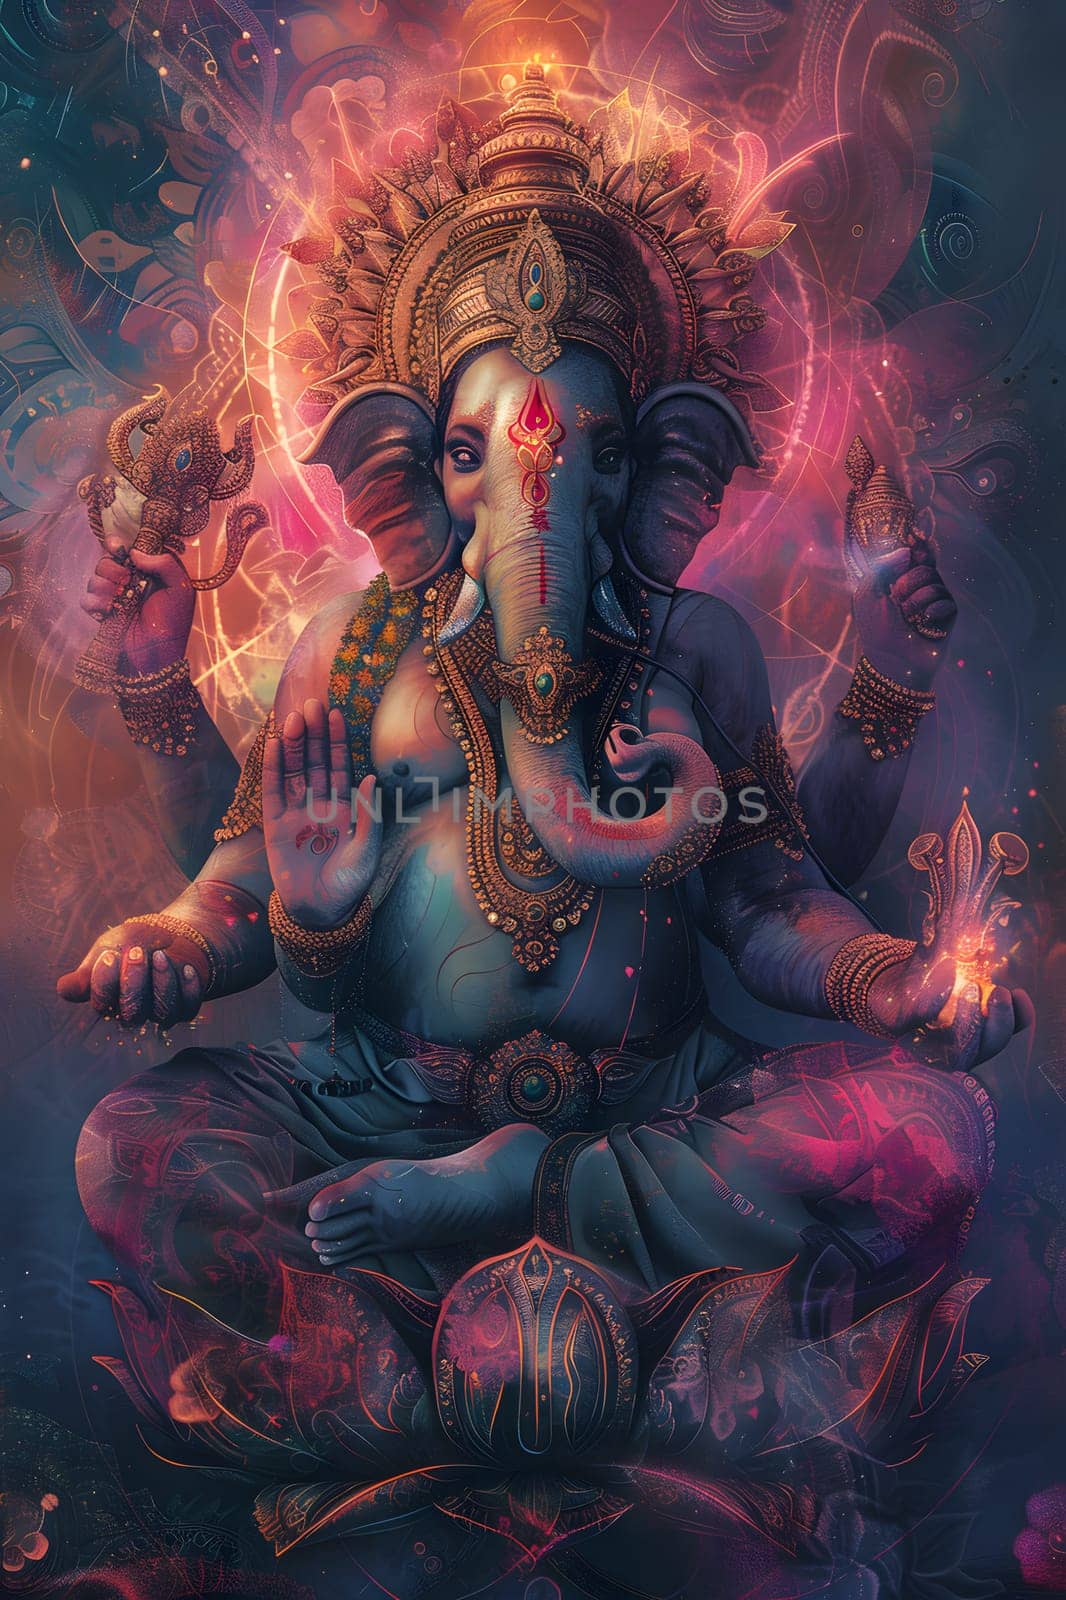 A vibrant painting of a deity gracefully sitting on a colorful lotus flower, surrounded by liquid and darkness, created with CG artwork